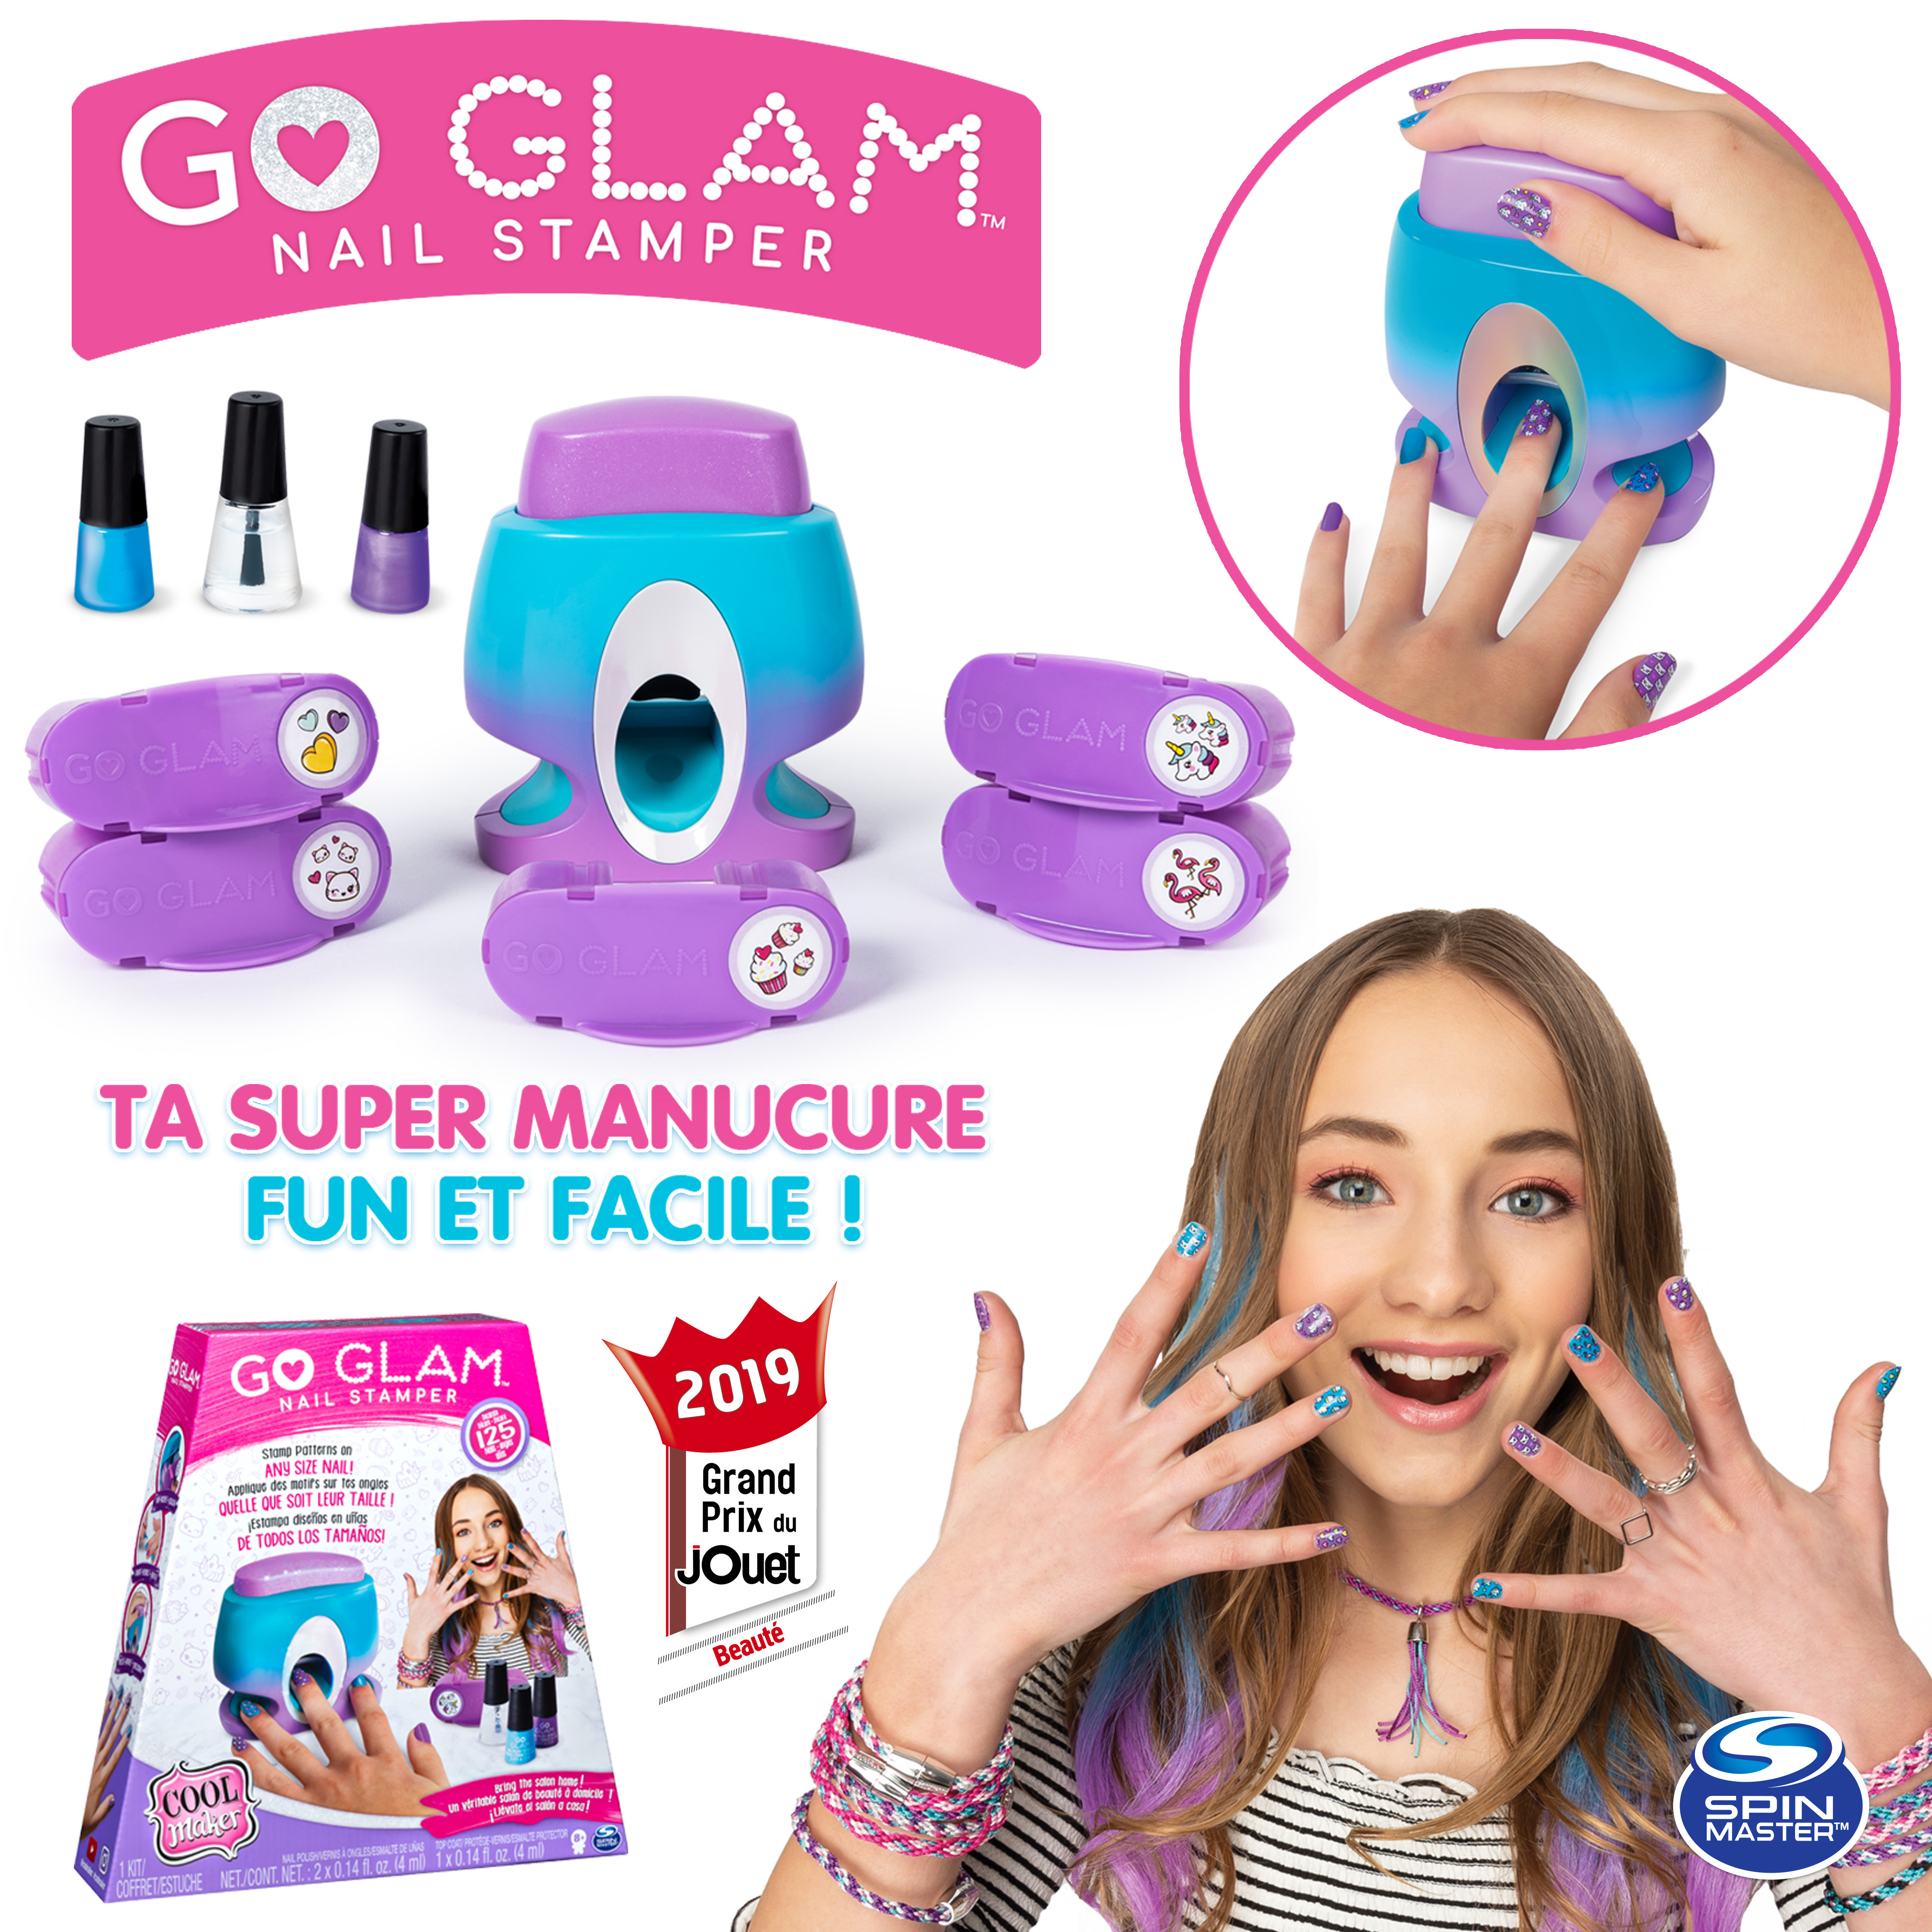 How To Use The Go Glam Nail Salon by Cool Maker (advert) 